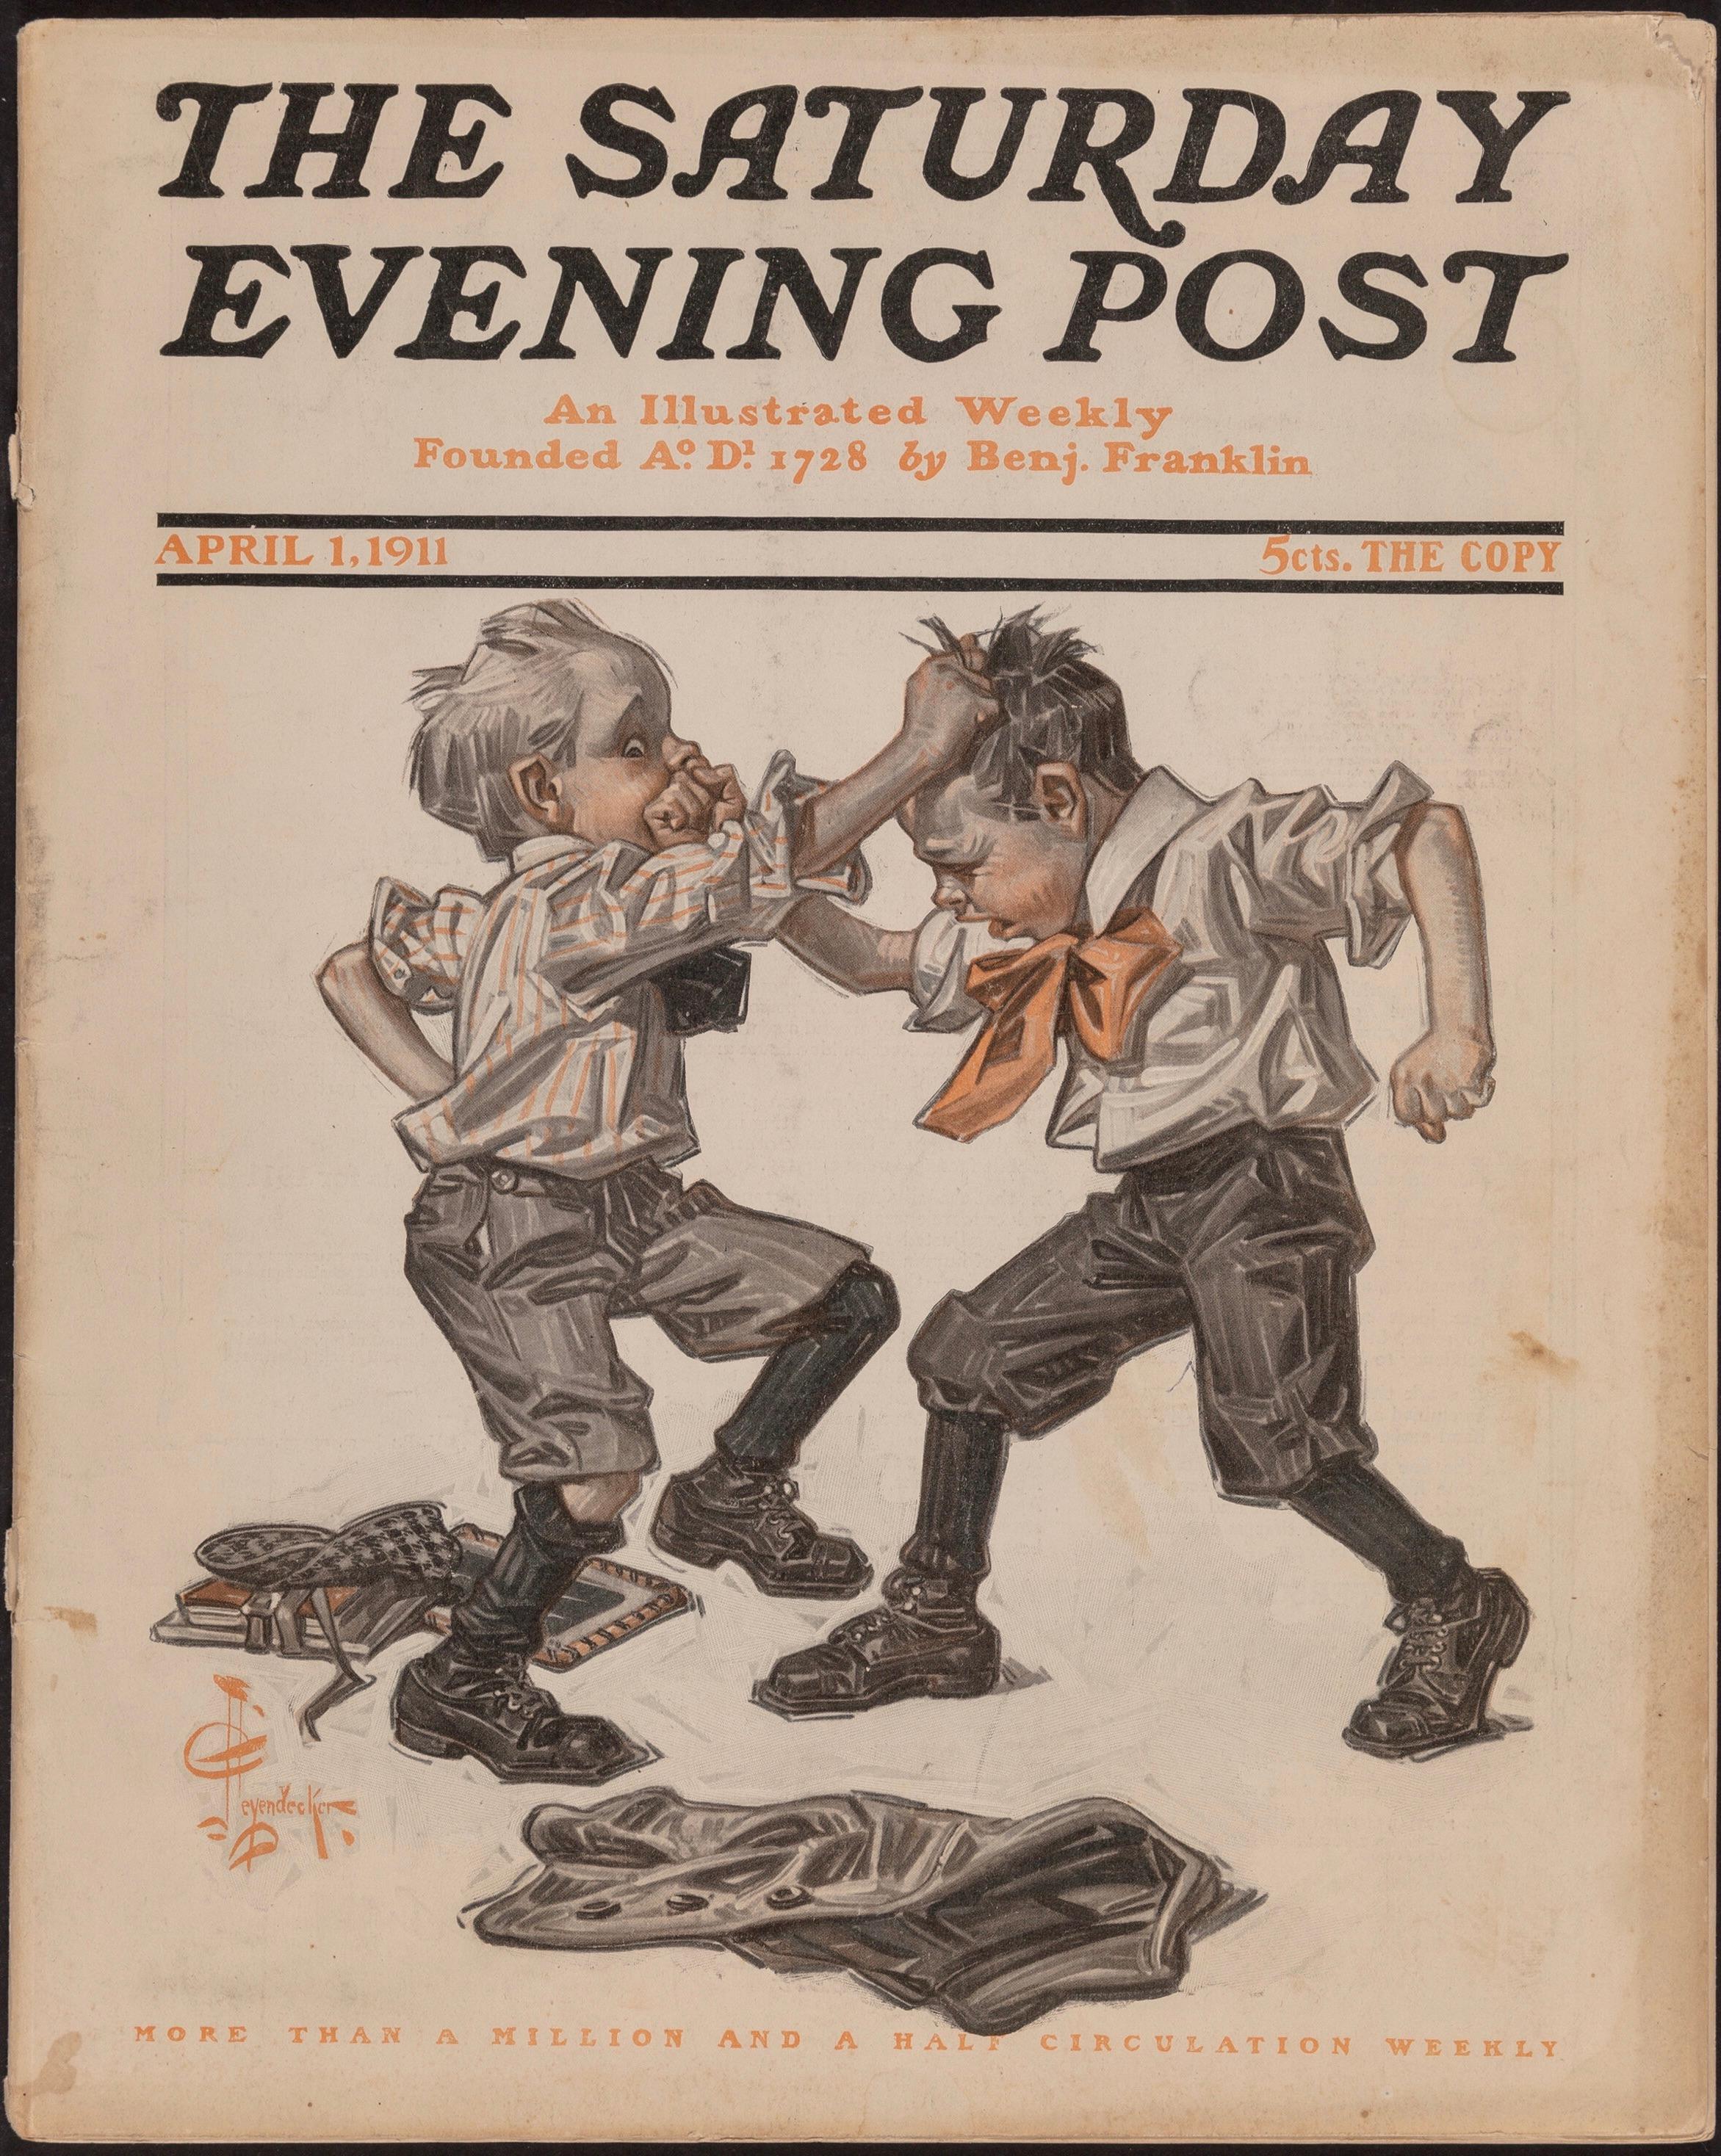 Fight Between Two Boys, Saturday Evening Post cover study - Brown Figurative Painting by Joseph Christian Leyendecker